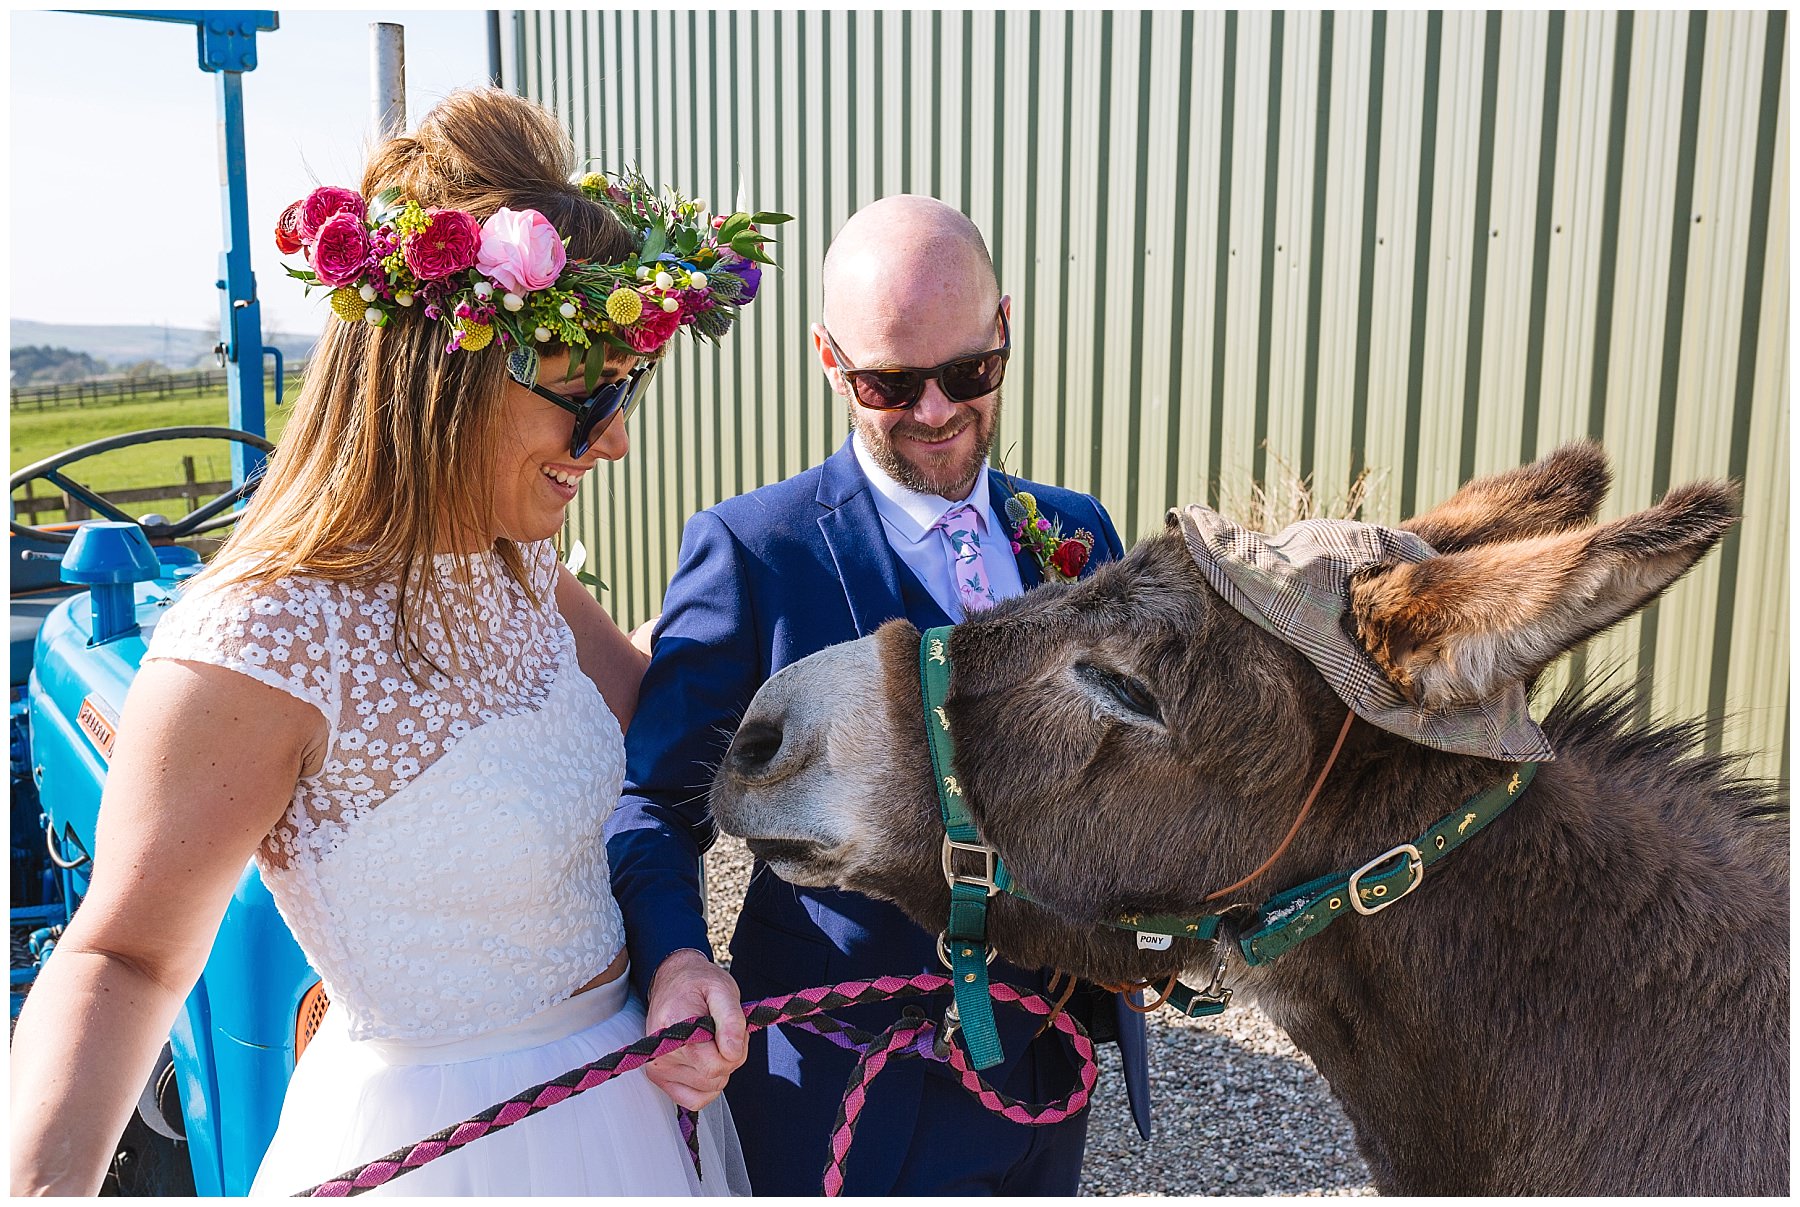 bride and groom and crakerjack the donkey at the wellbeing farm